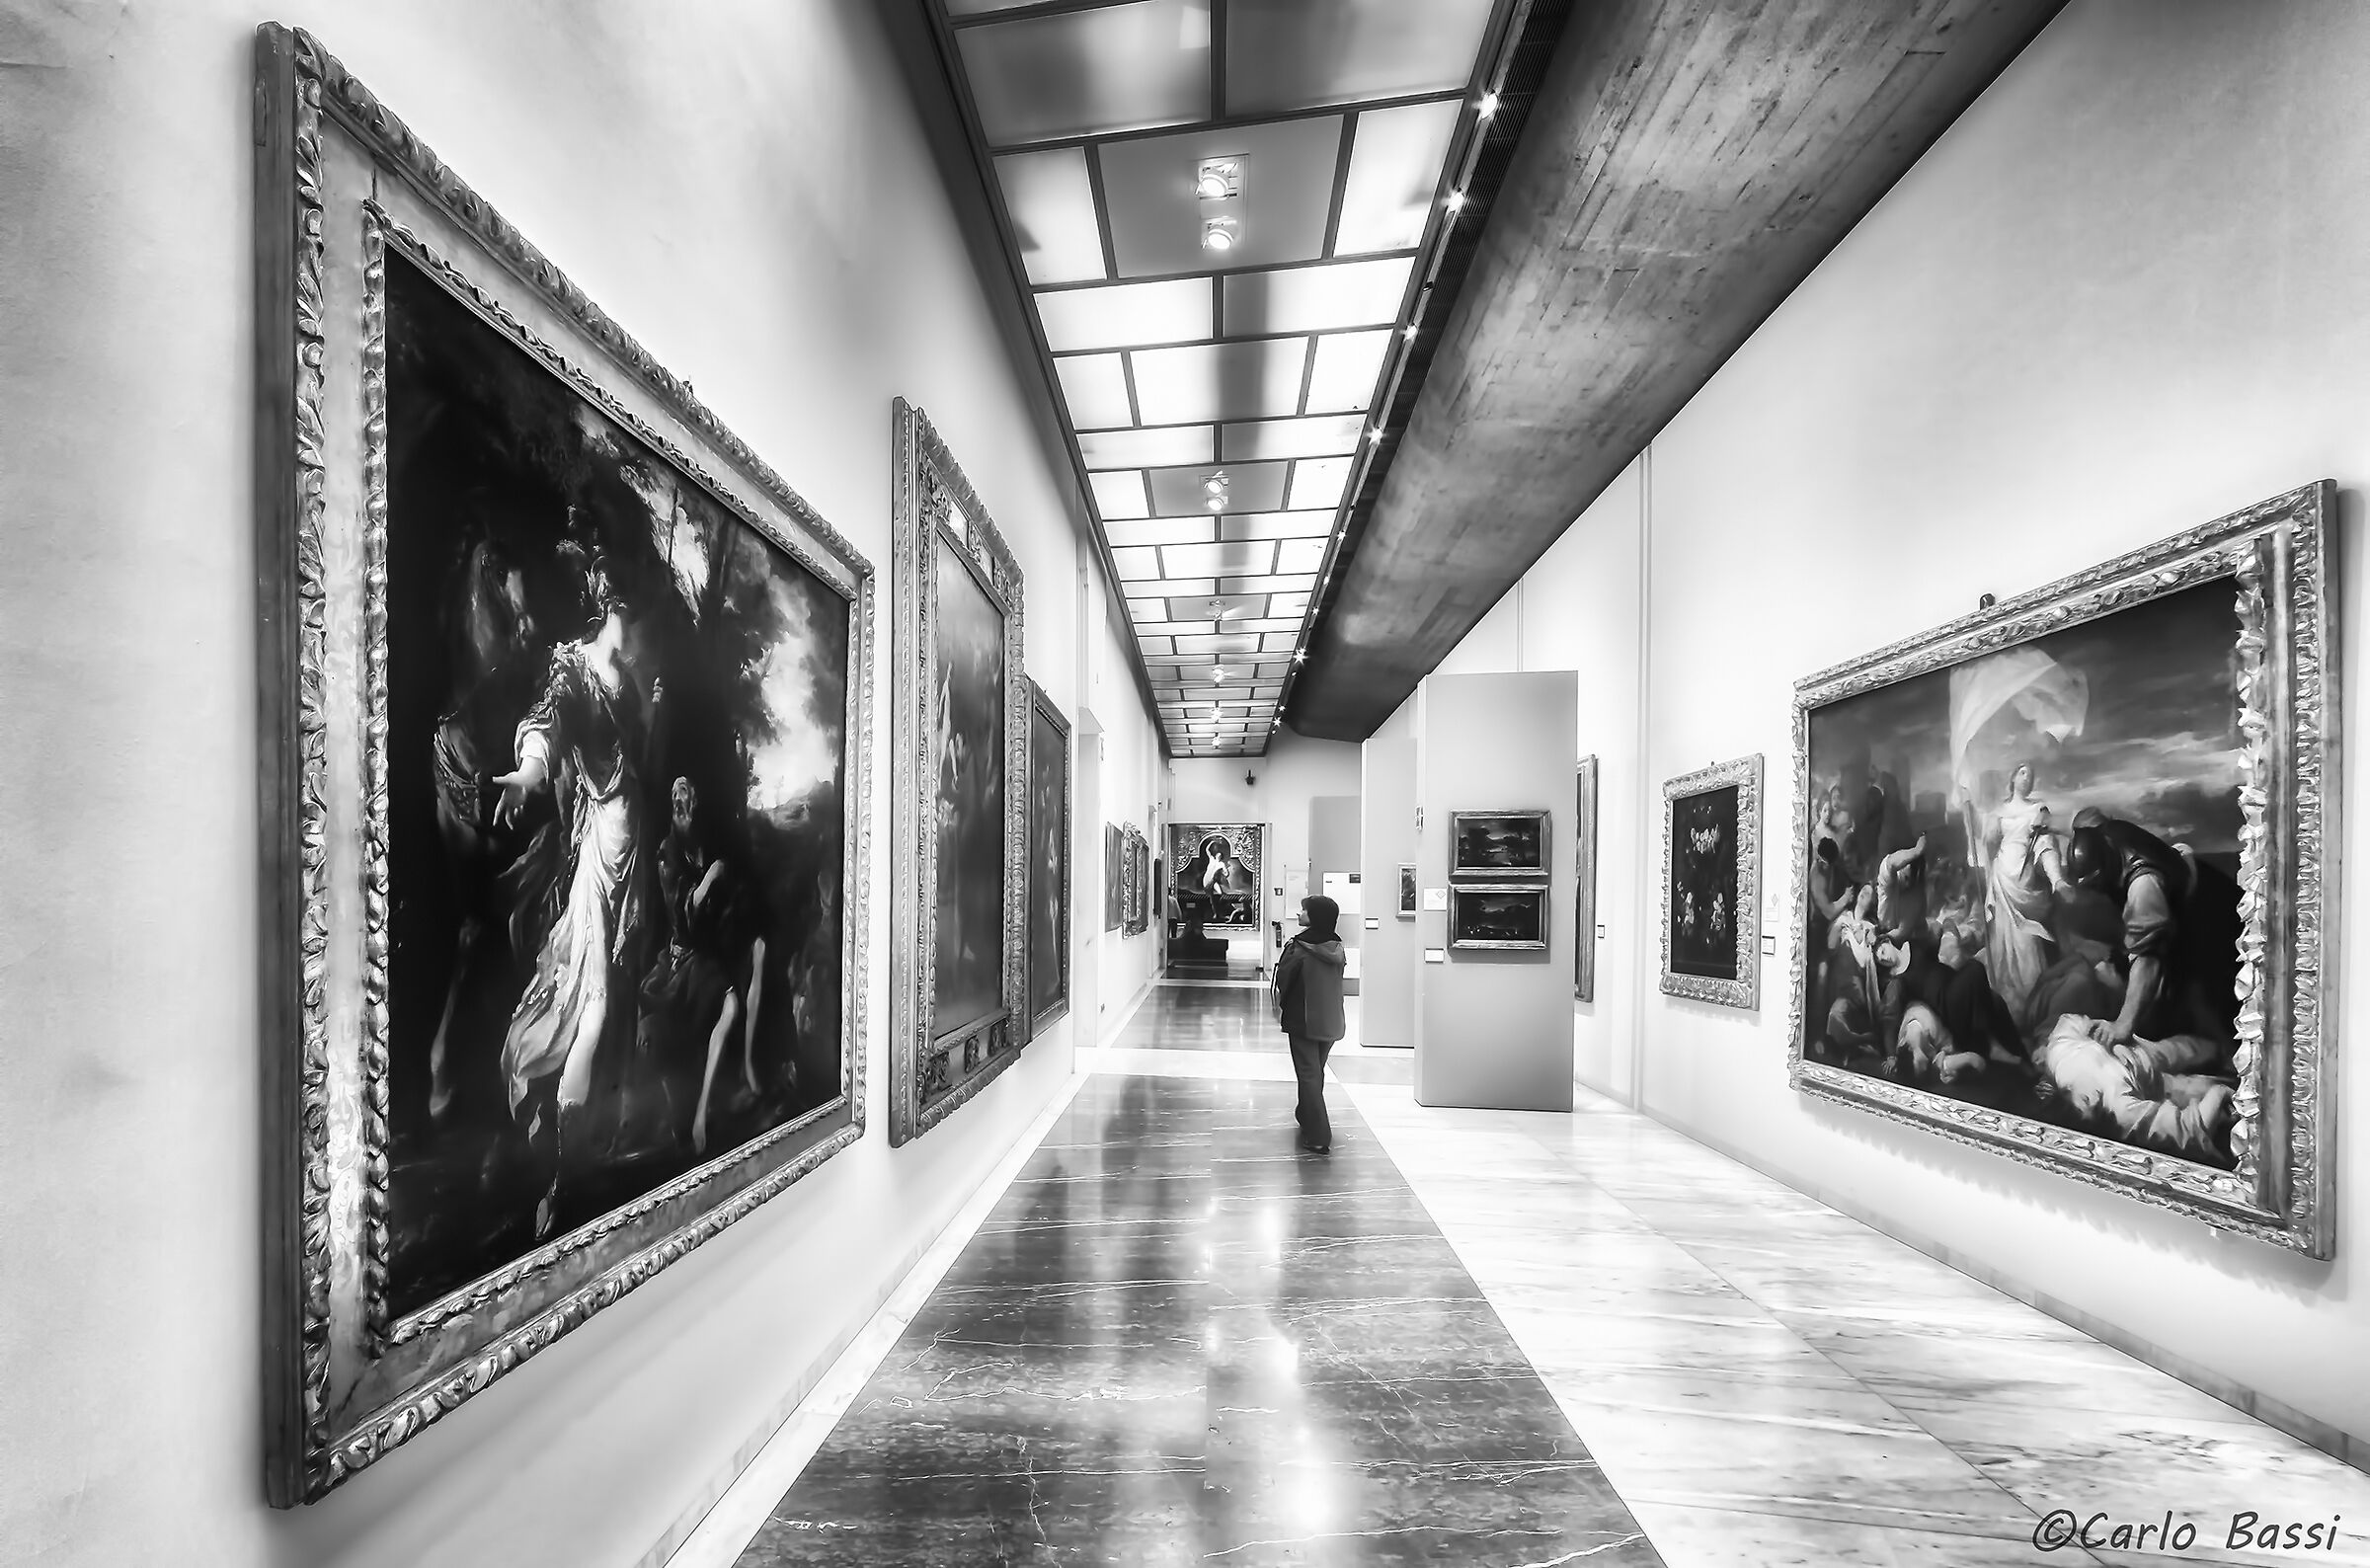 A morning in the Art Gallery...